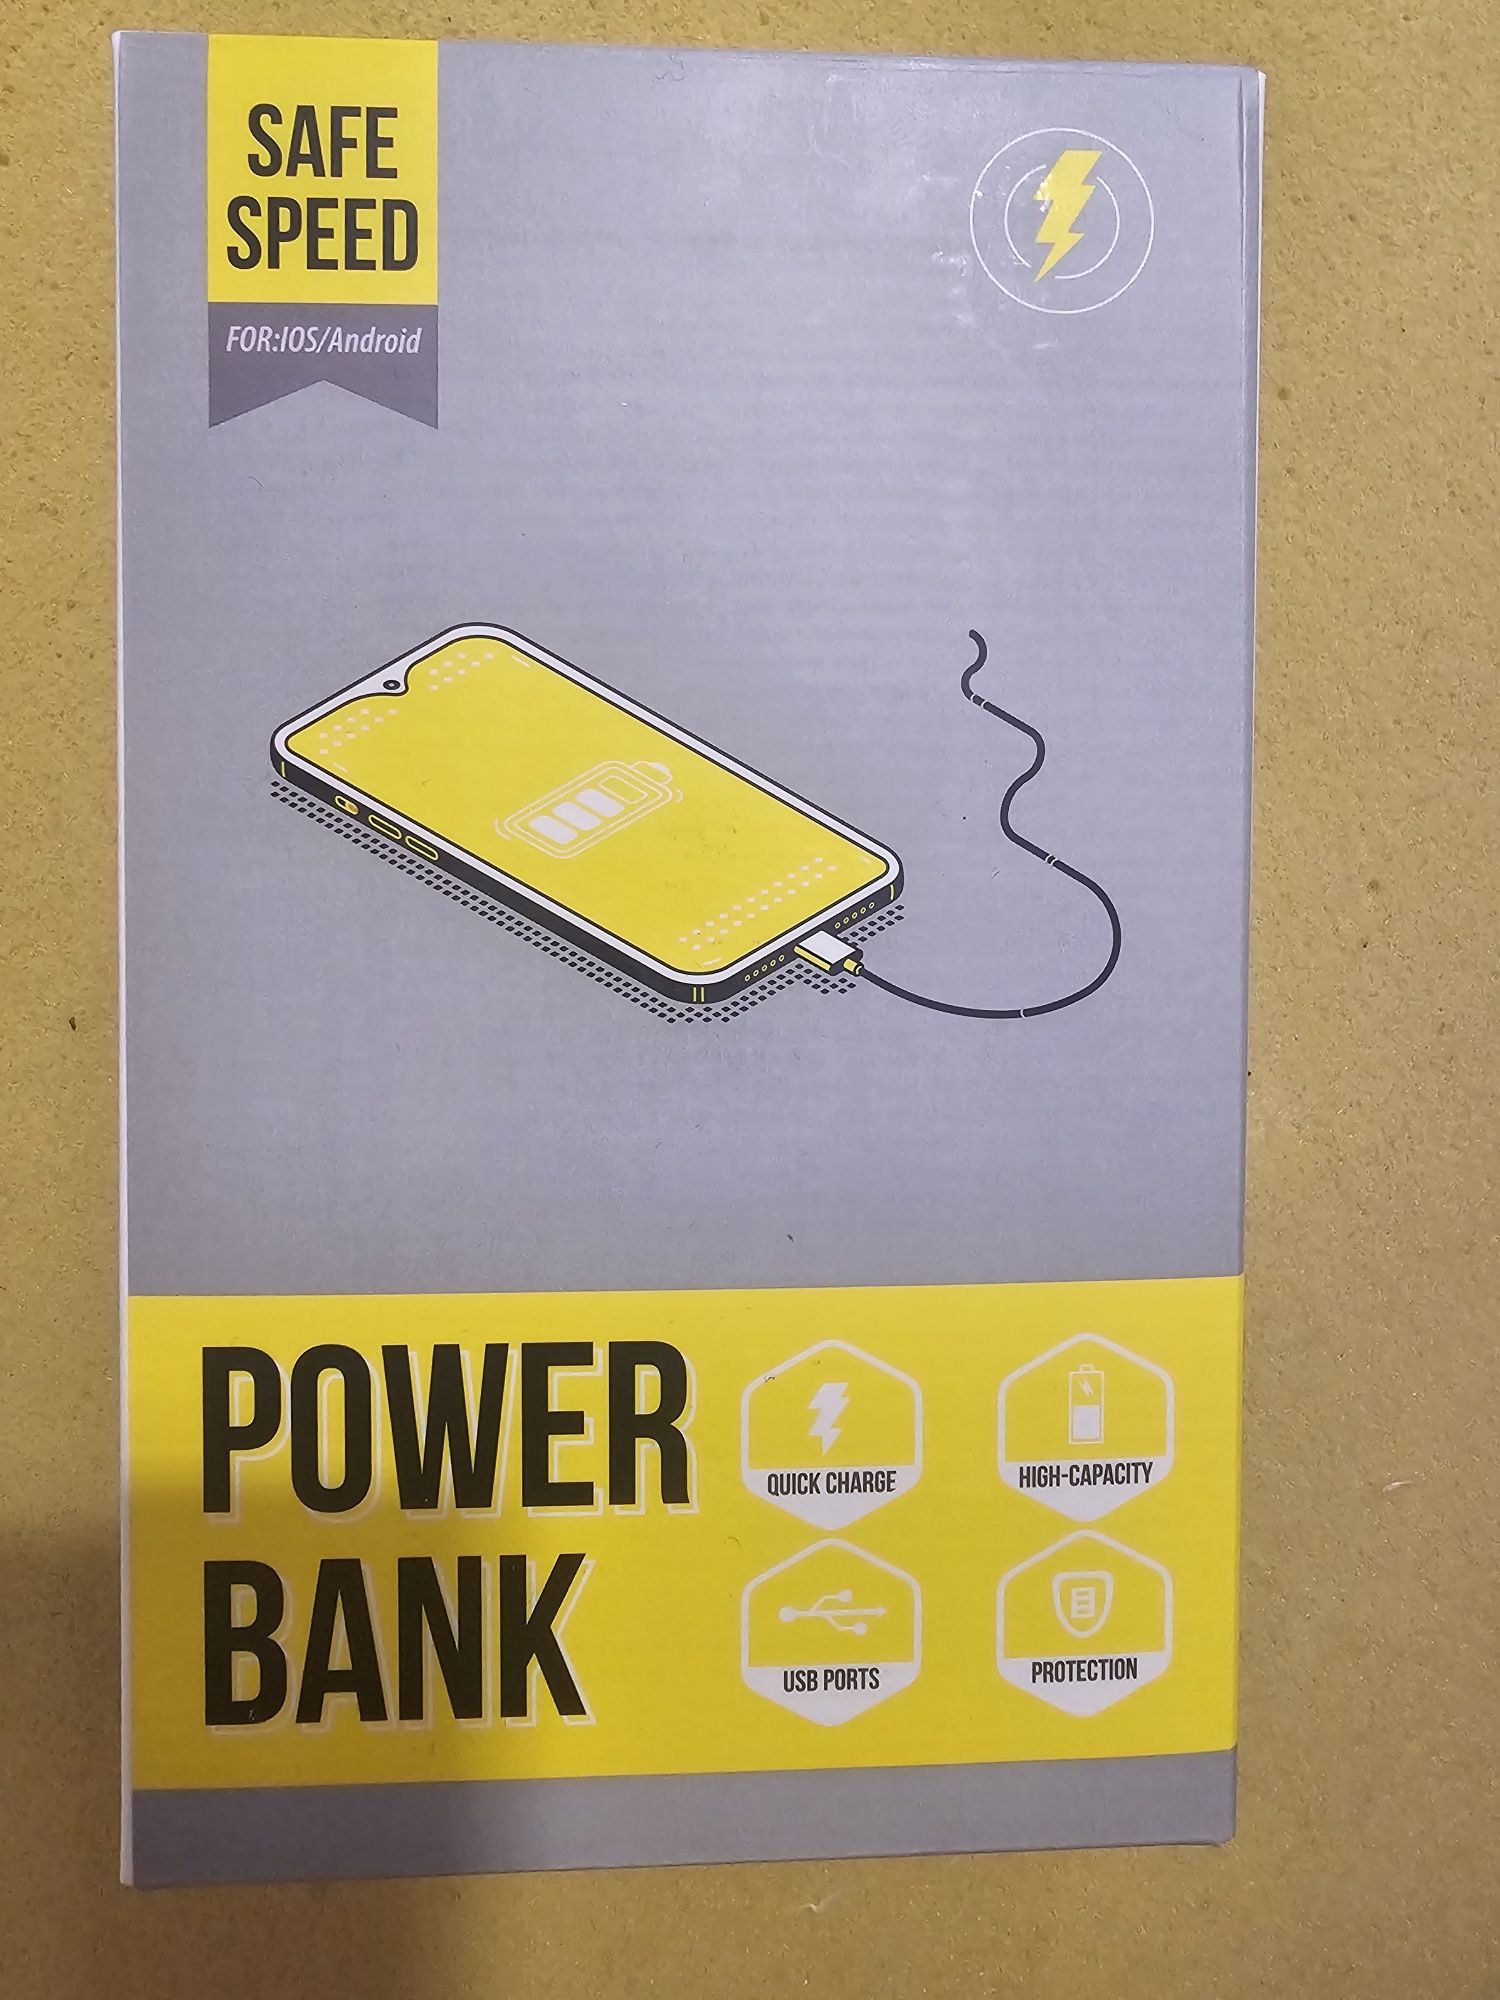 Vand power bank 27000 mah quick charge 4.0